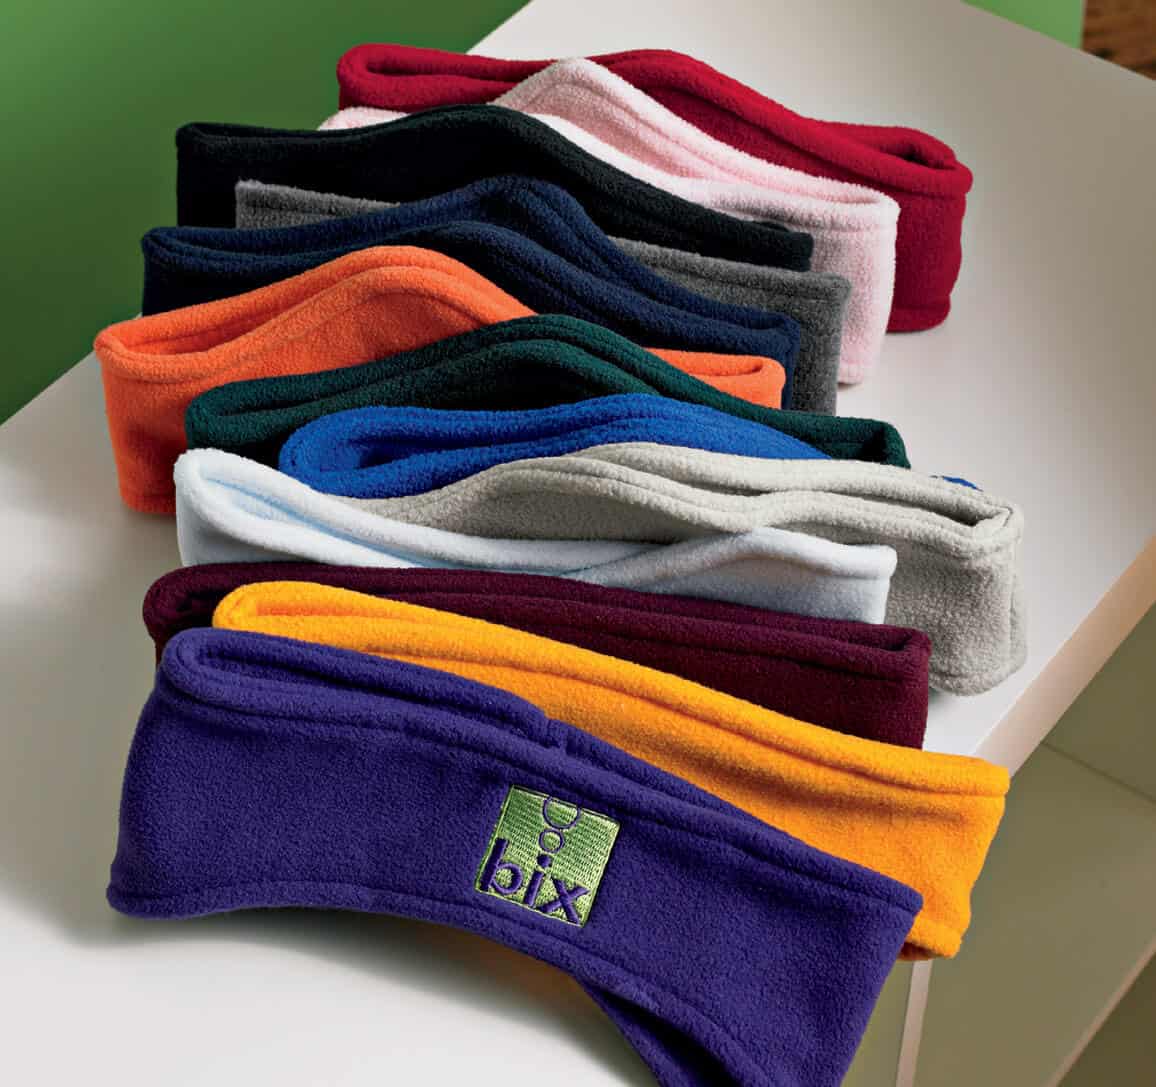 Ear warmer head bands. Screen print or Embroider name, logo, and slogan. Great promotional item for events and tradeshows.